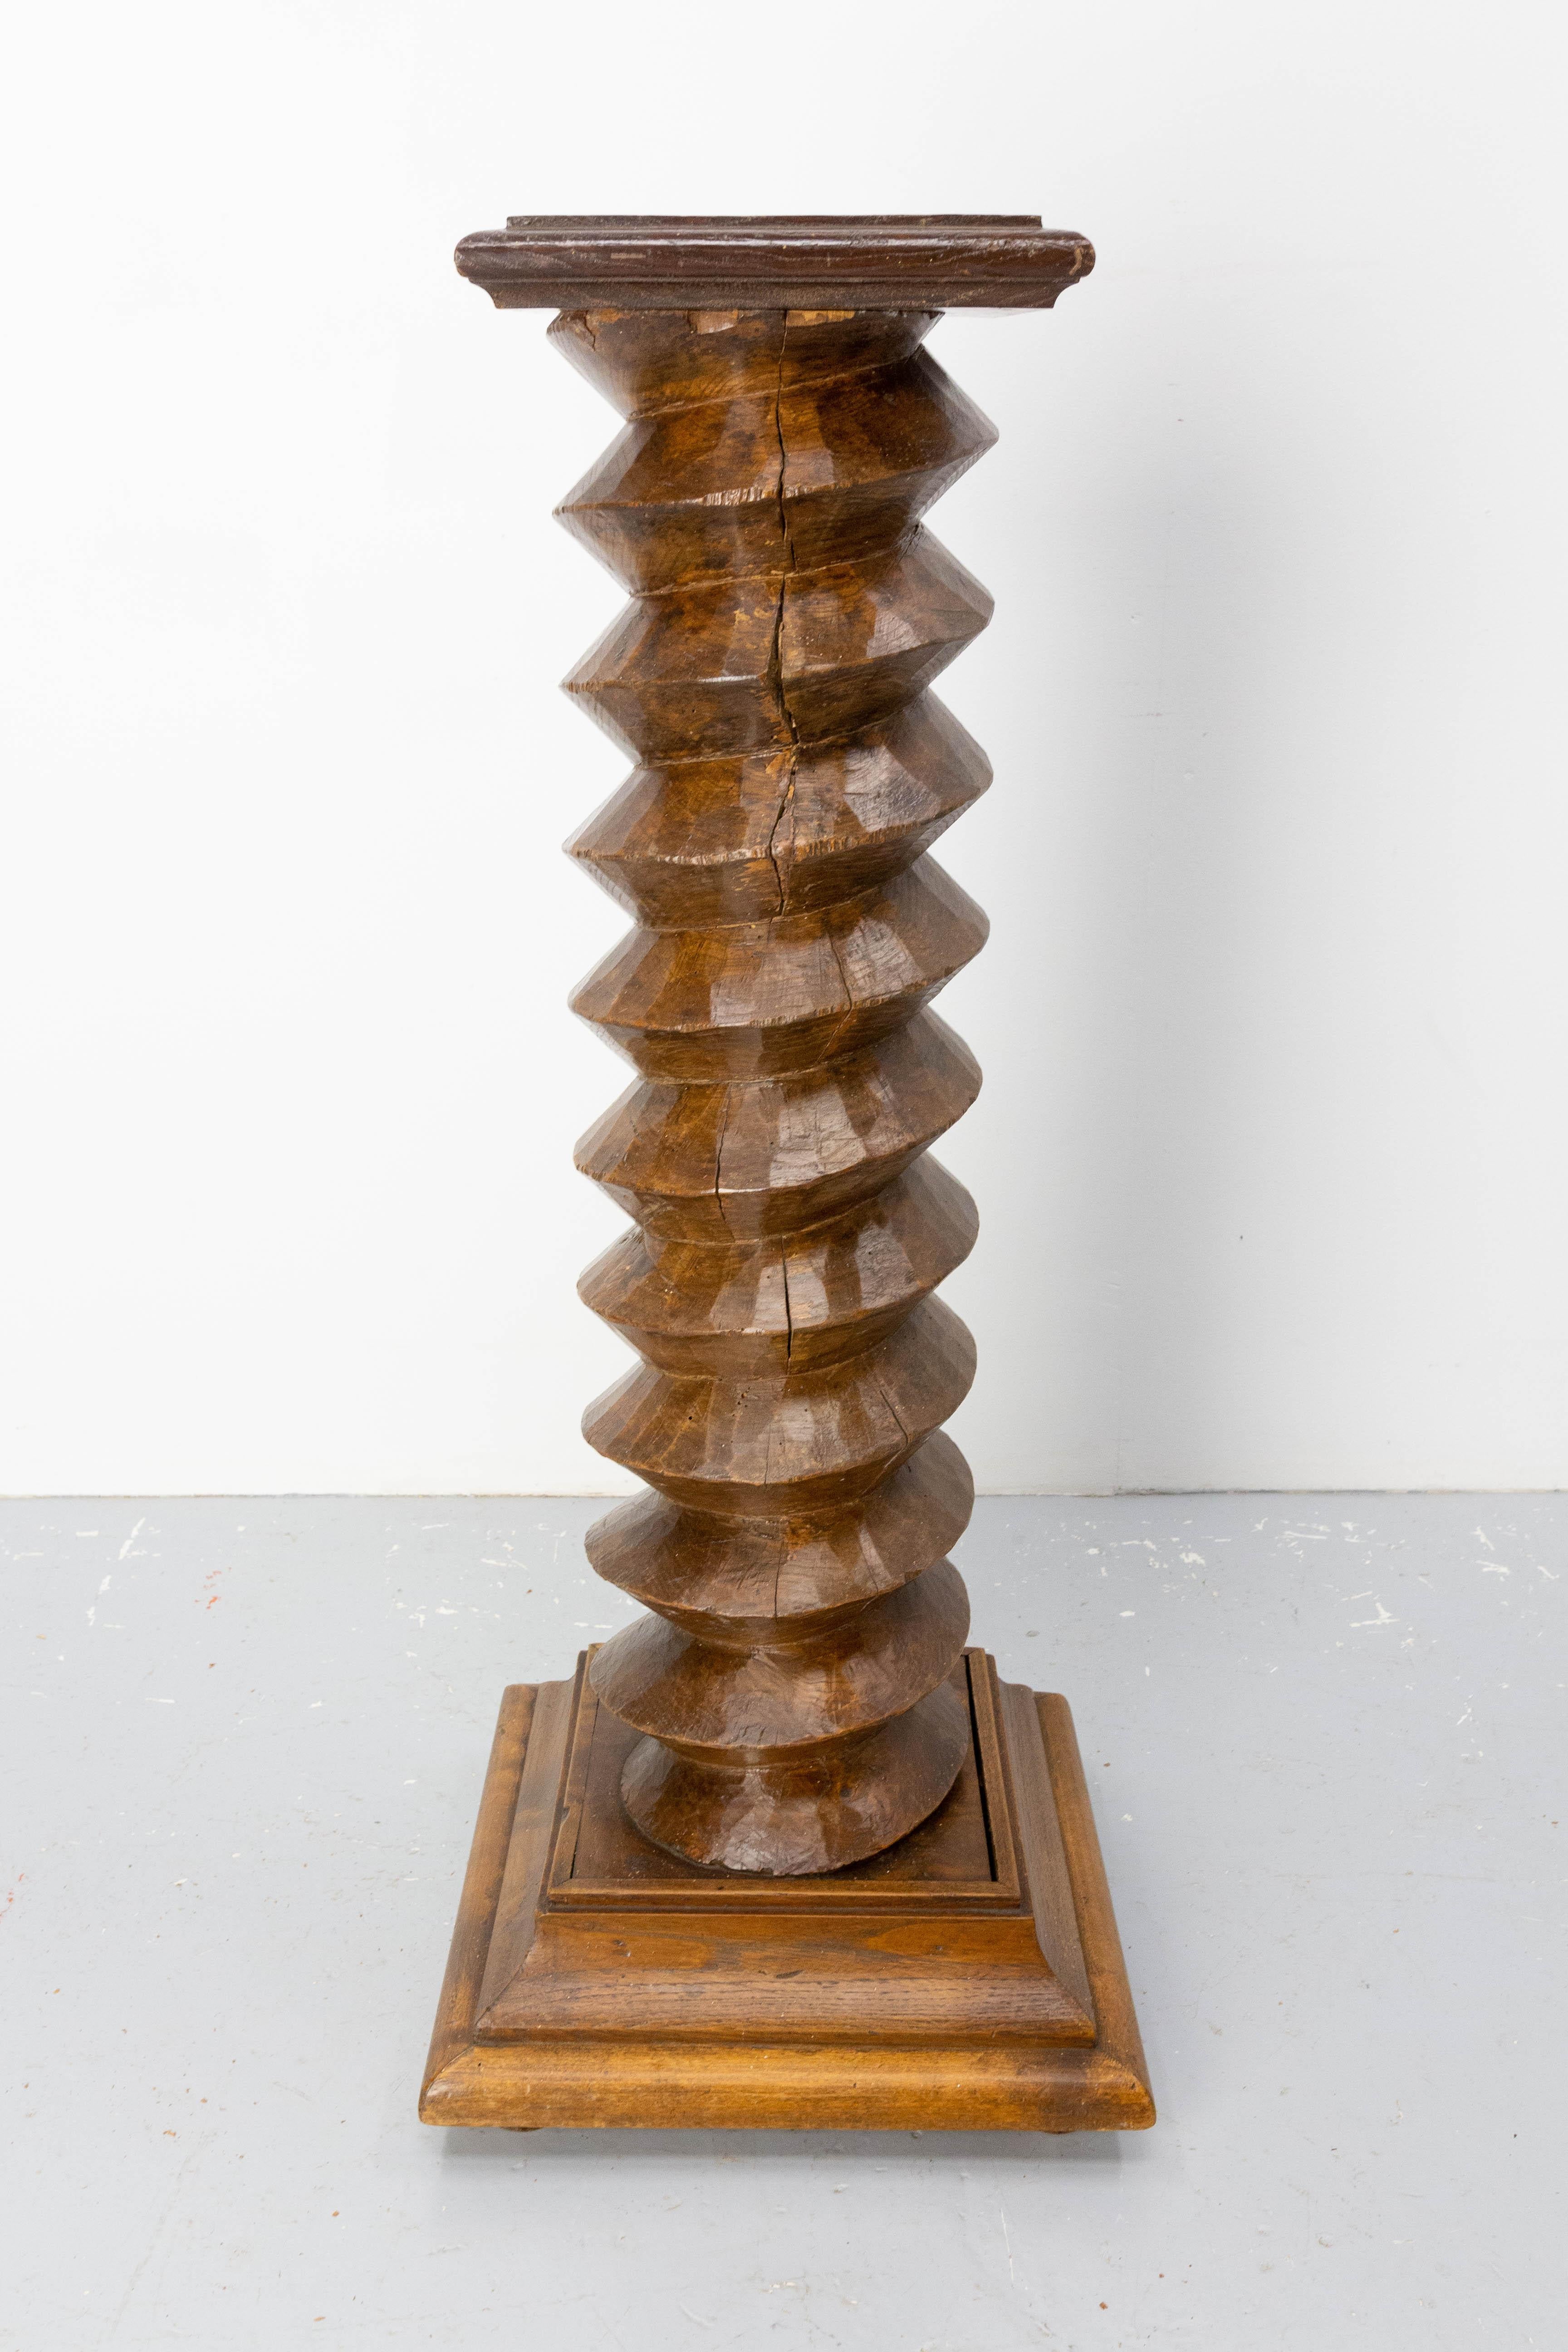 French pedestal wine press screw, 19th century.
Brutalist style
Good antique condition
Solid and sound

Shipping: 
36 / 36 / 91 cm 16.6 Kg.